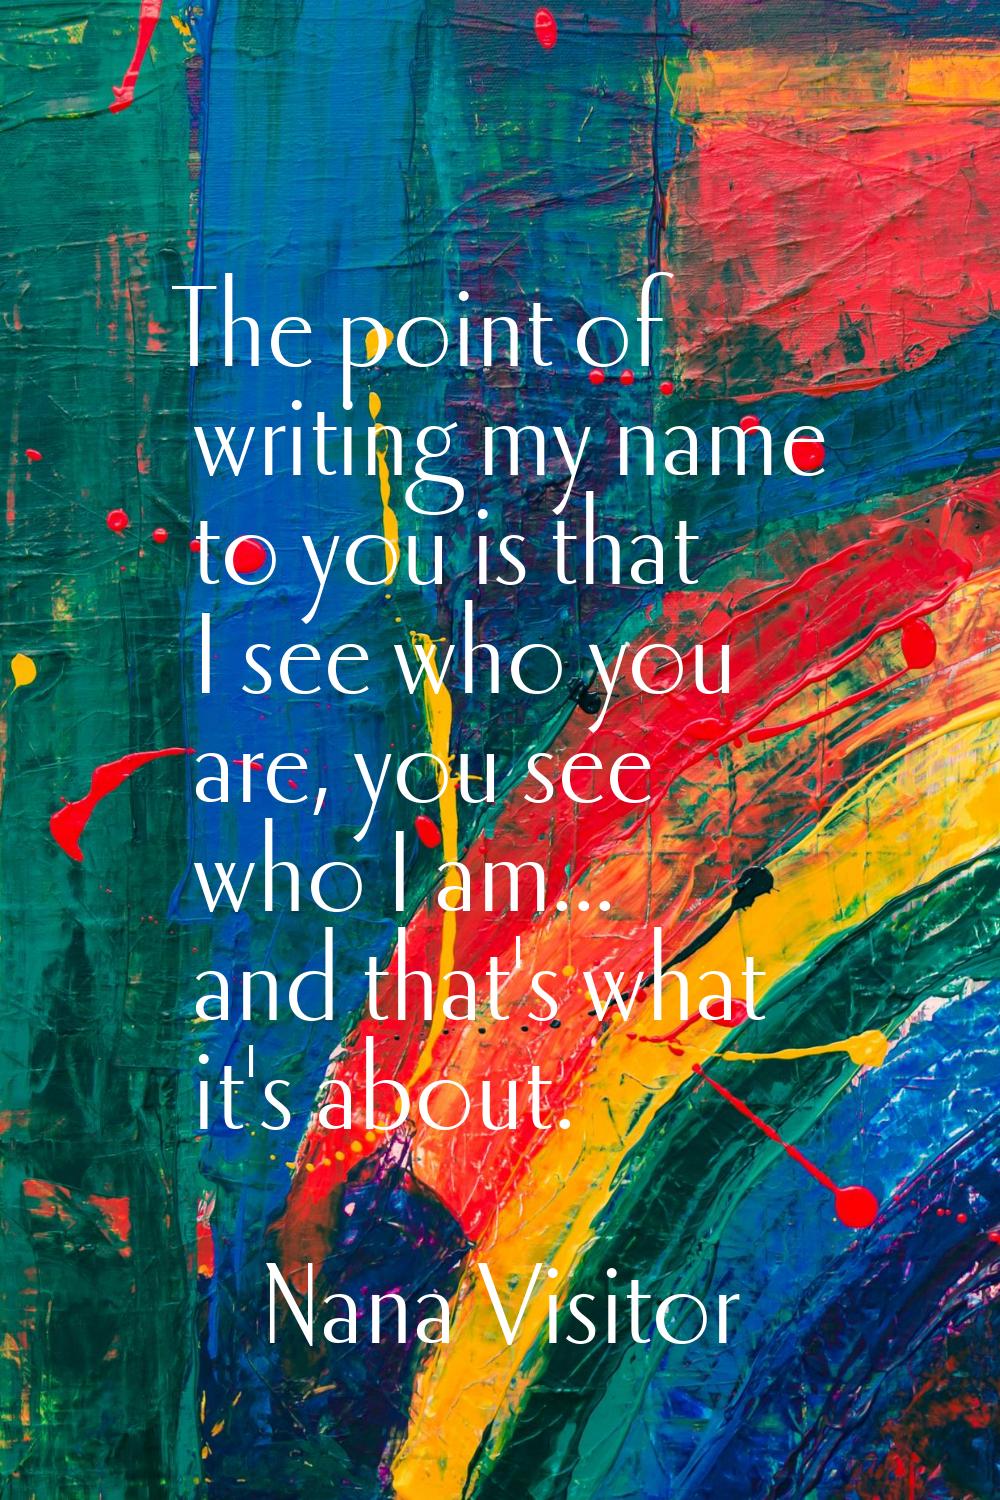 The point of writing my name to you is that I see who you are, you see who I am... and that's what 